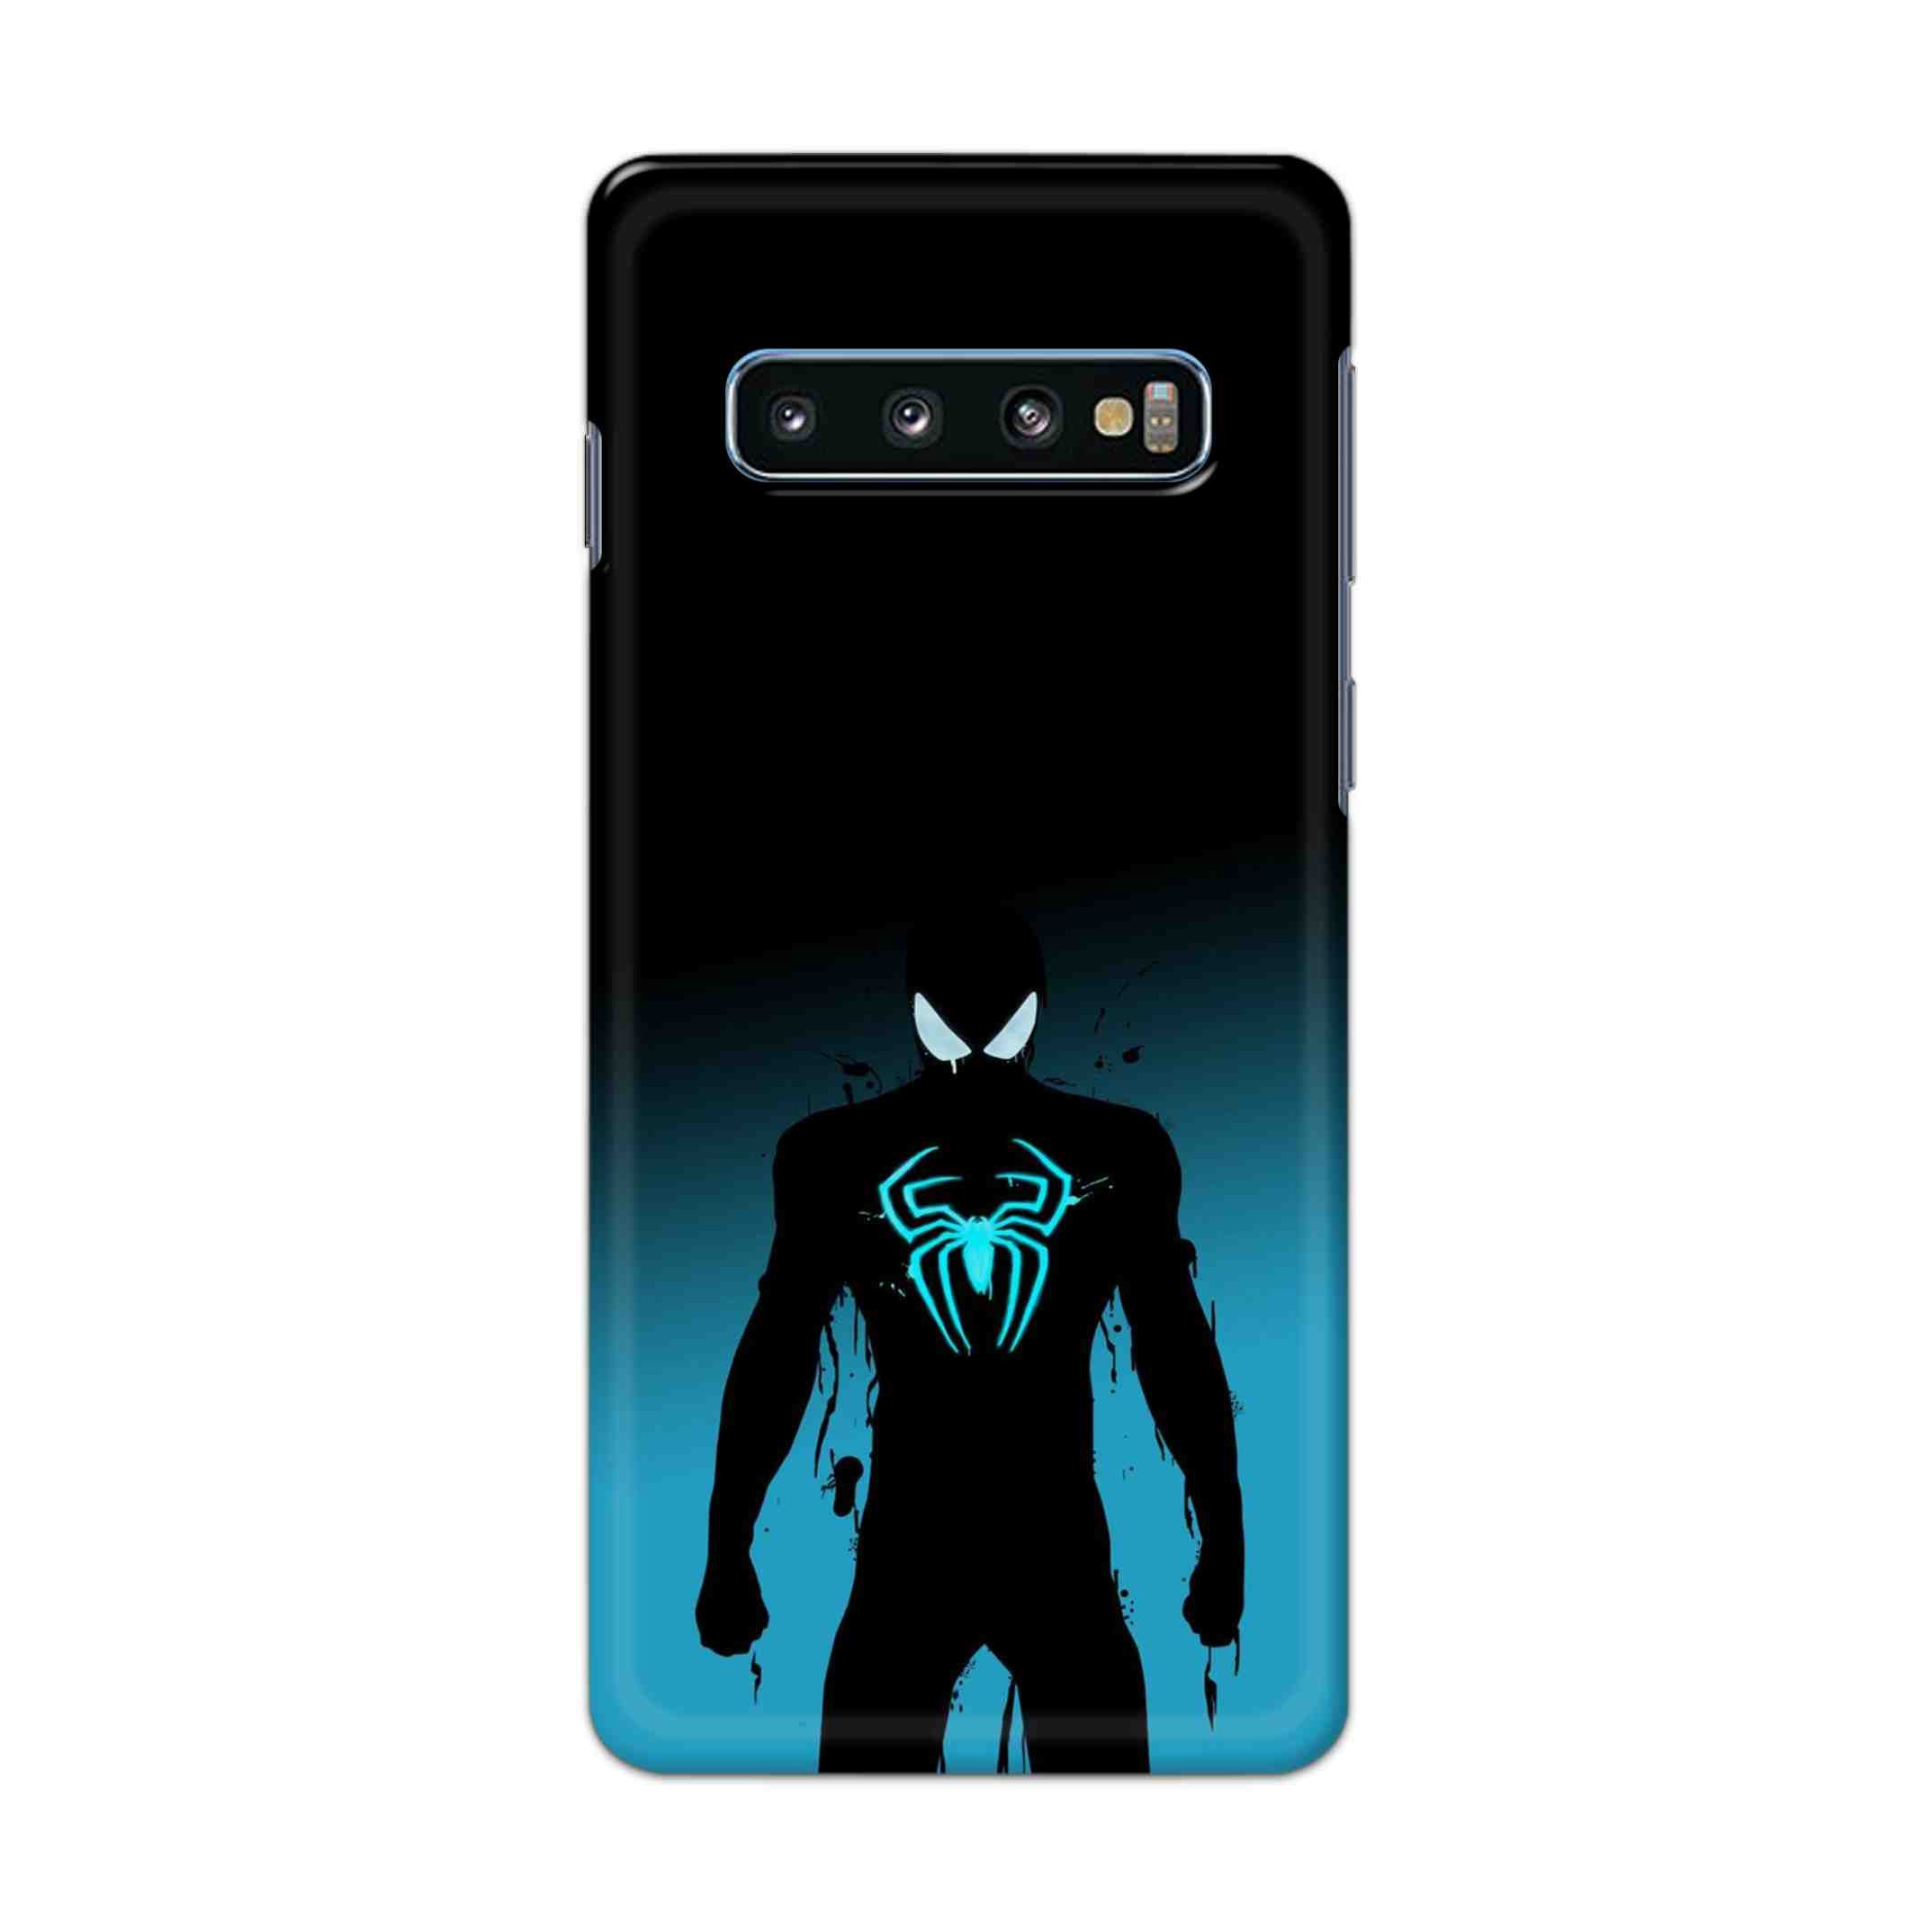 Buy Neon Spiderman Hard Back Mobile Phone Case Cover For Samsung Galaxy S10 Plus Online